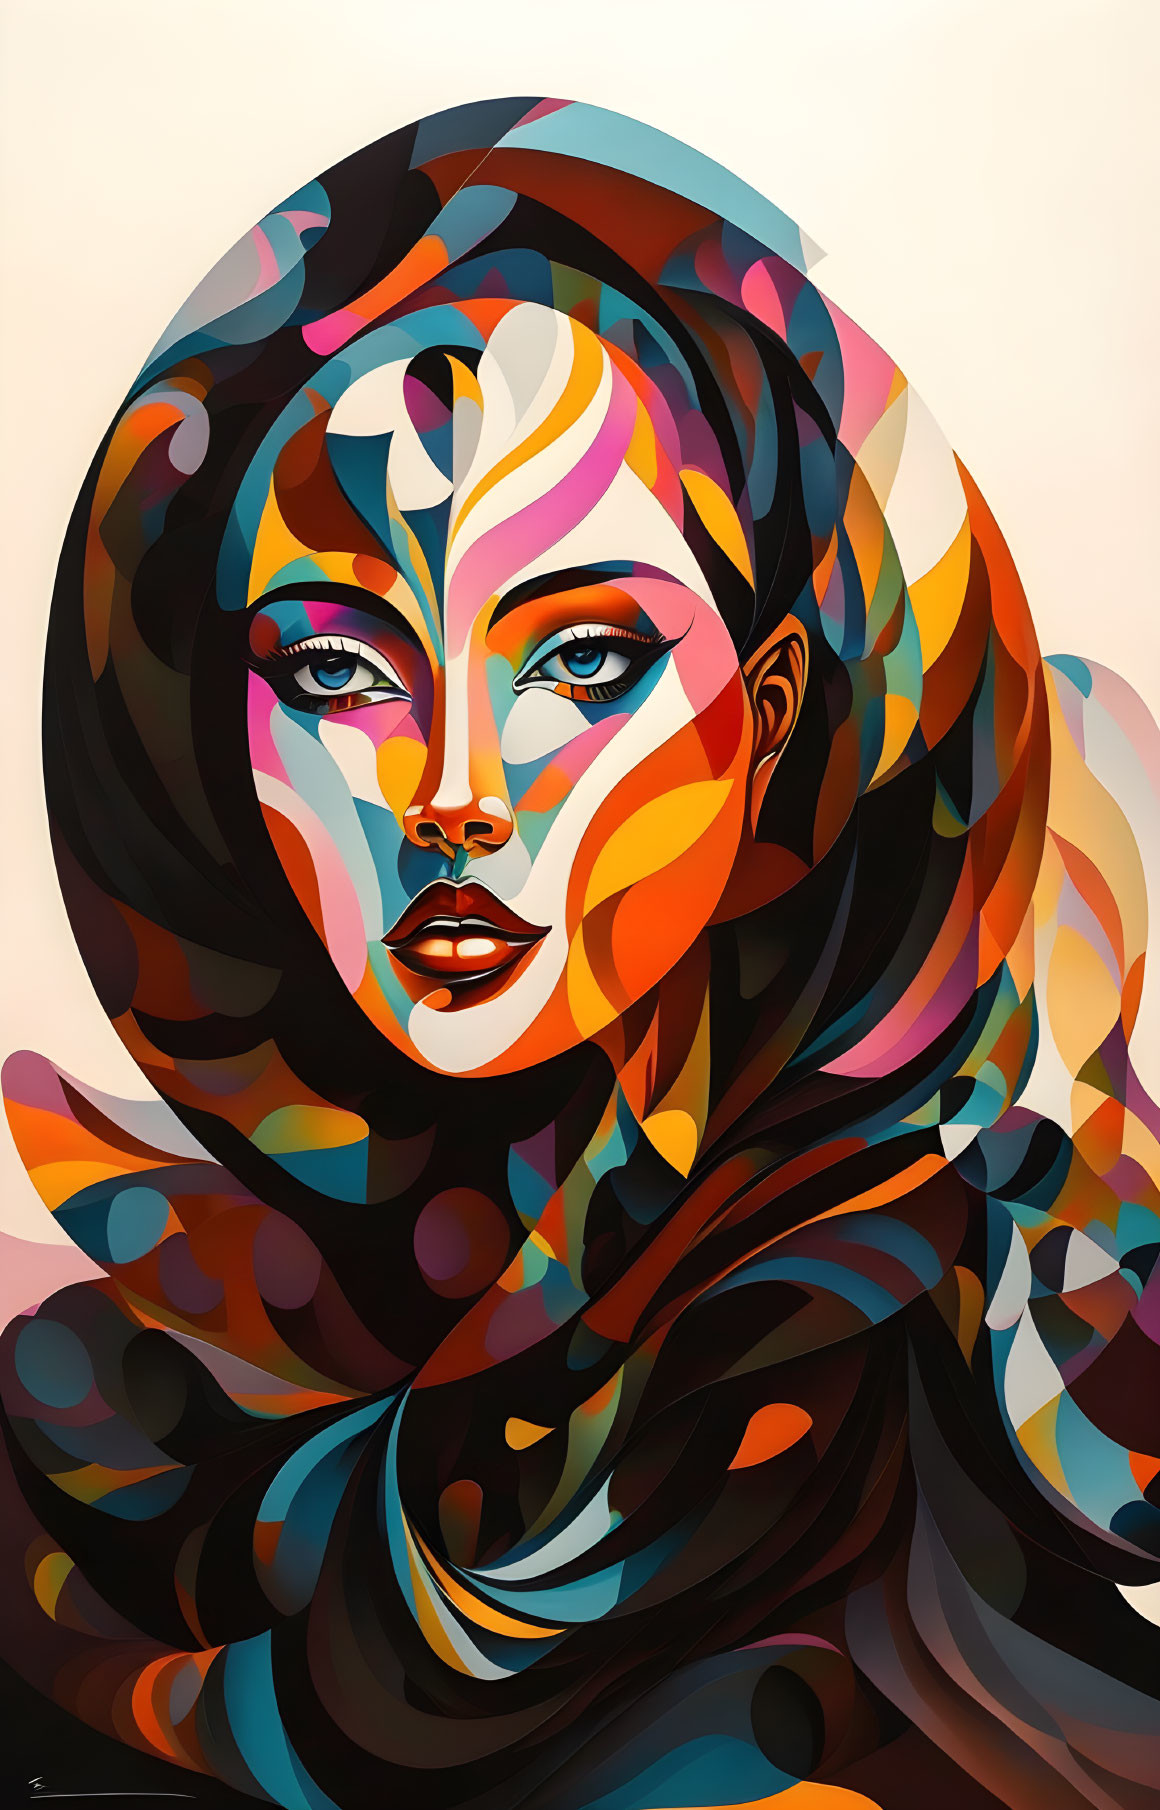 Vibrant abstract portrait with swirling warm hues.